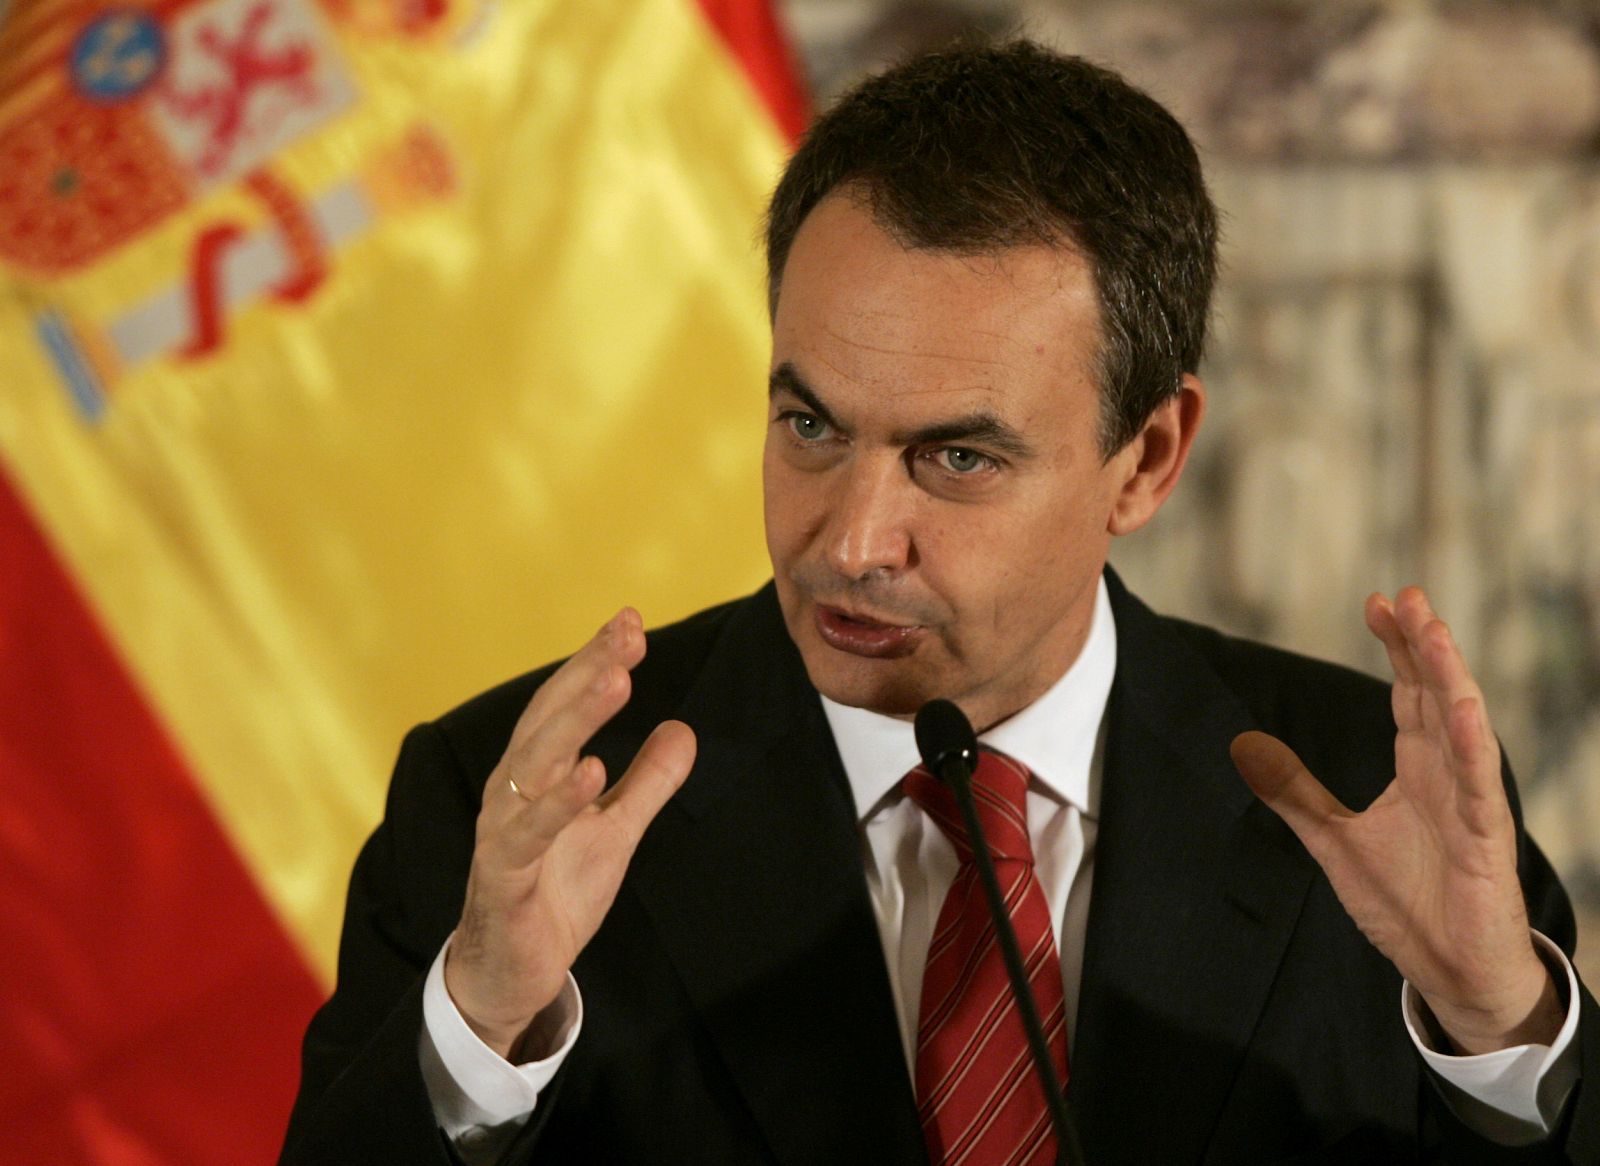 Spain's Prime Minister Jose Luis Rodriguez Zapatero speaks during a news conference at the government palace in Lima